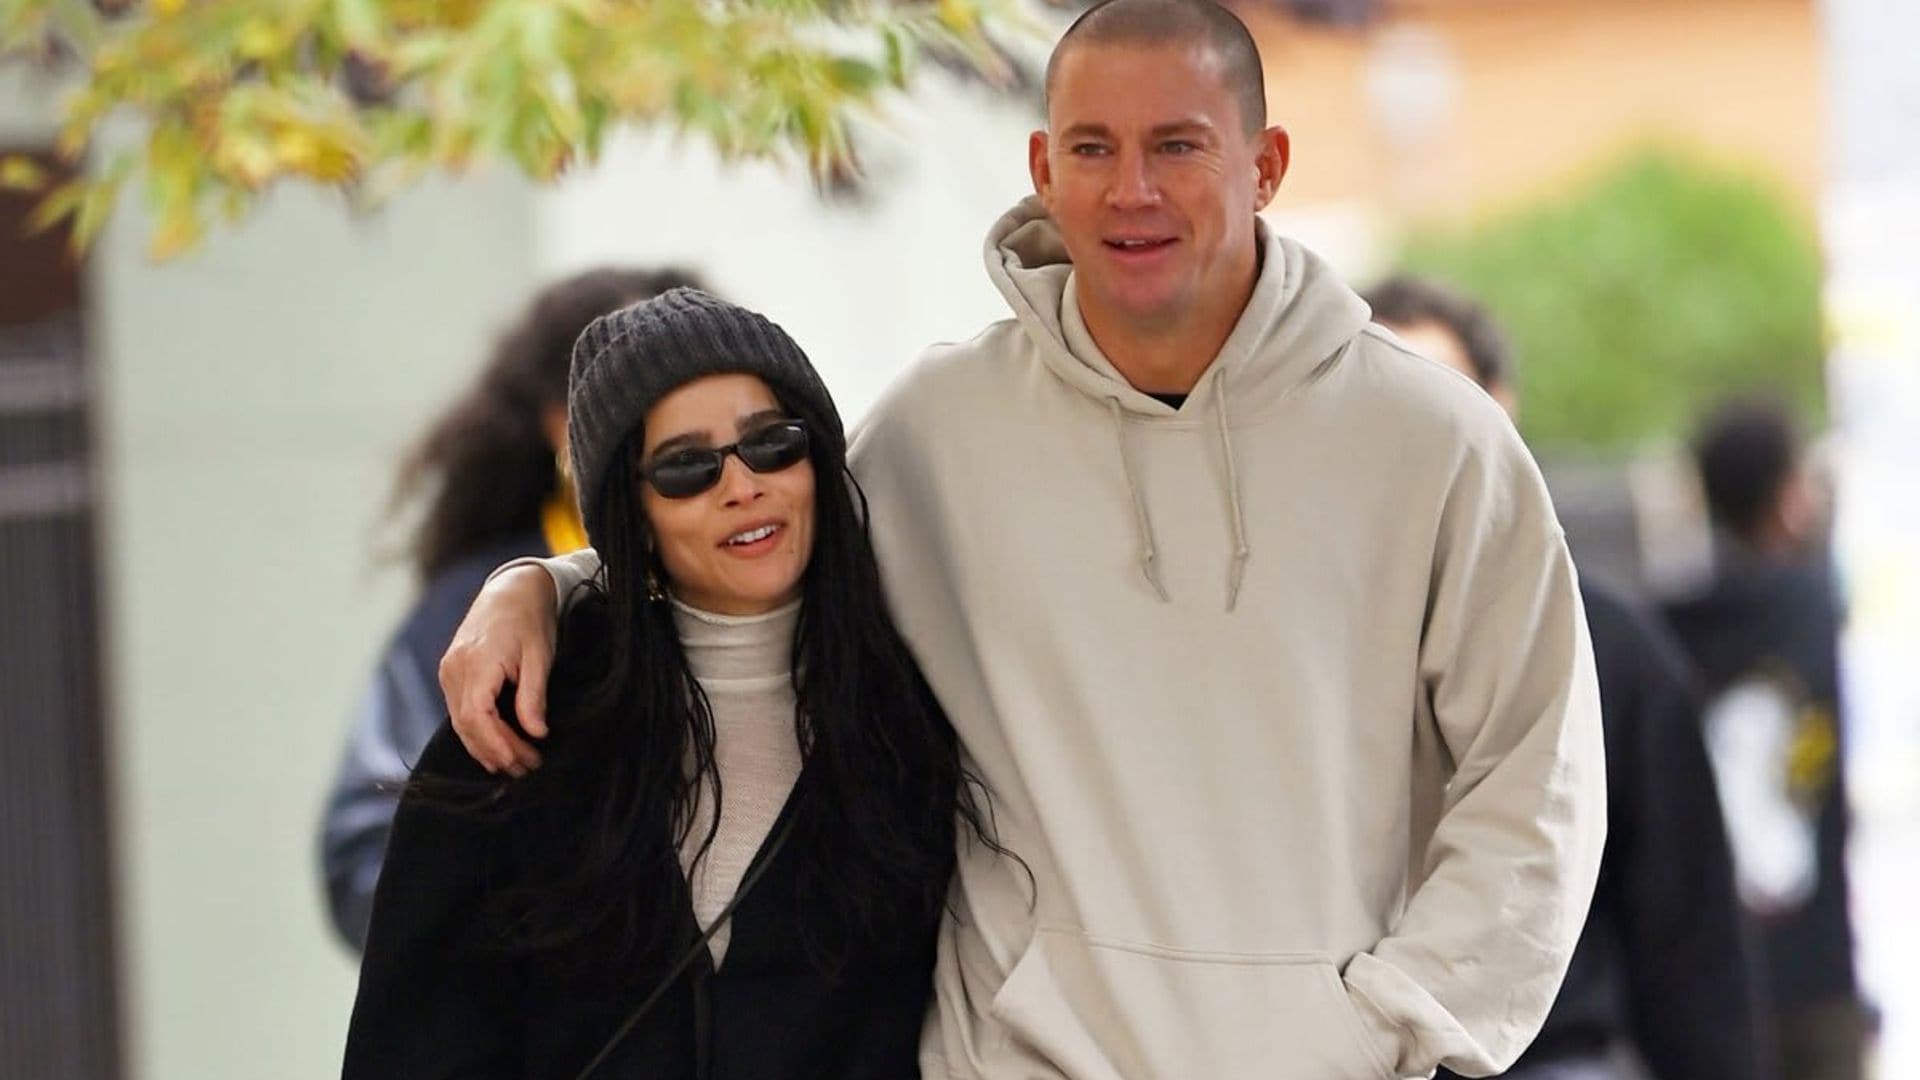 Zoë Kravitz and Channing Tatum cozy up with some PDA during NYC lunch date